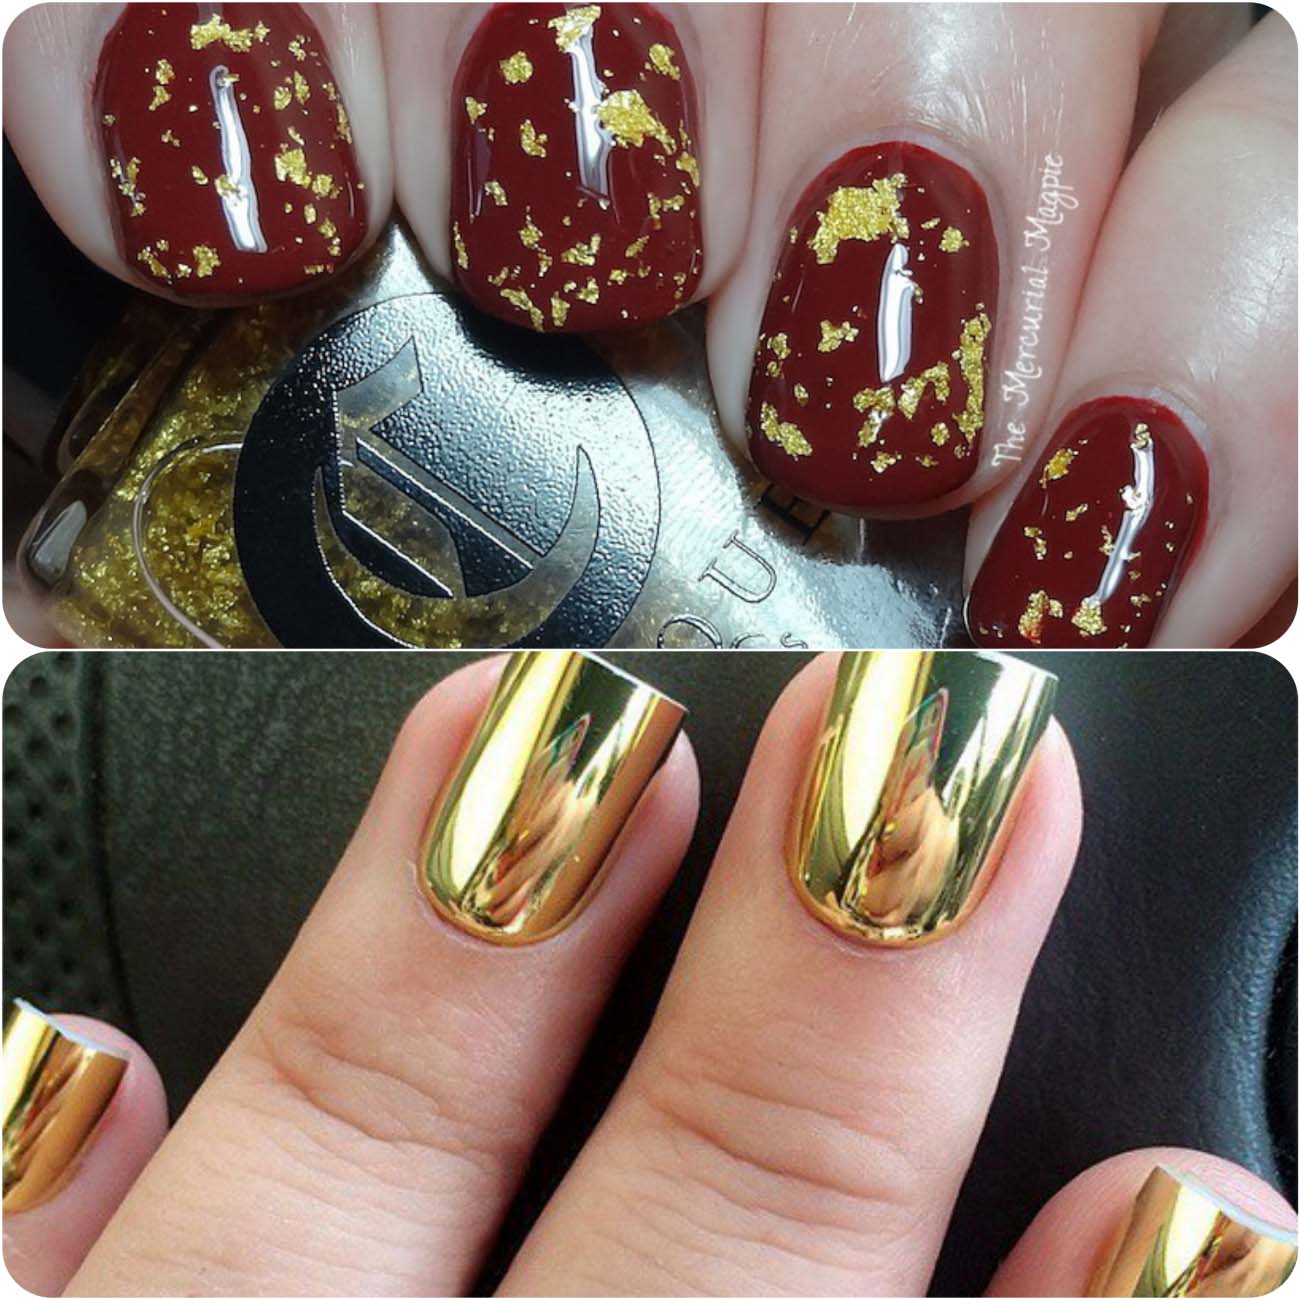 Best Dazzling Reflecting Nail Art Designs For Girls....styloplanet (5)